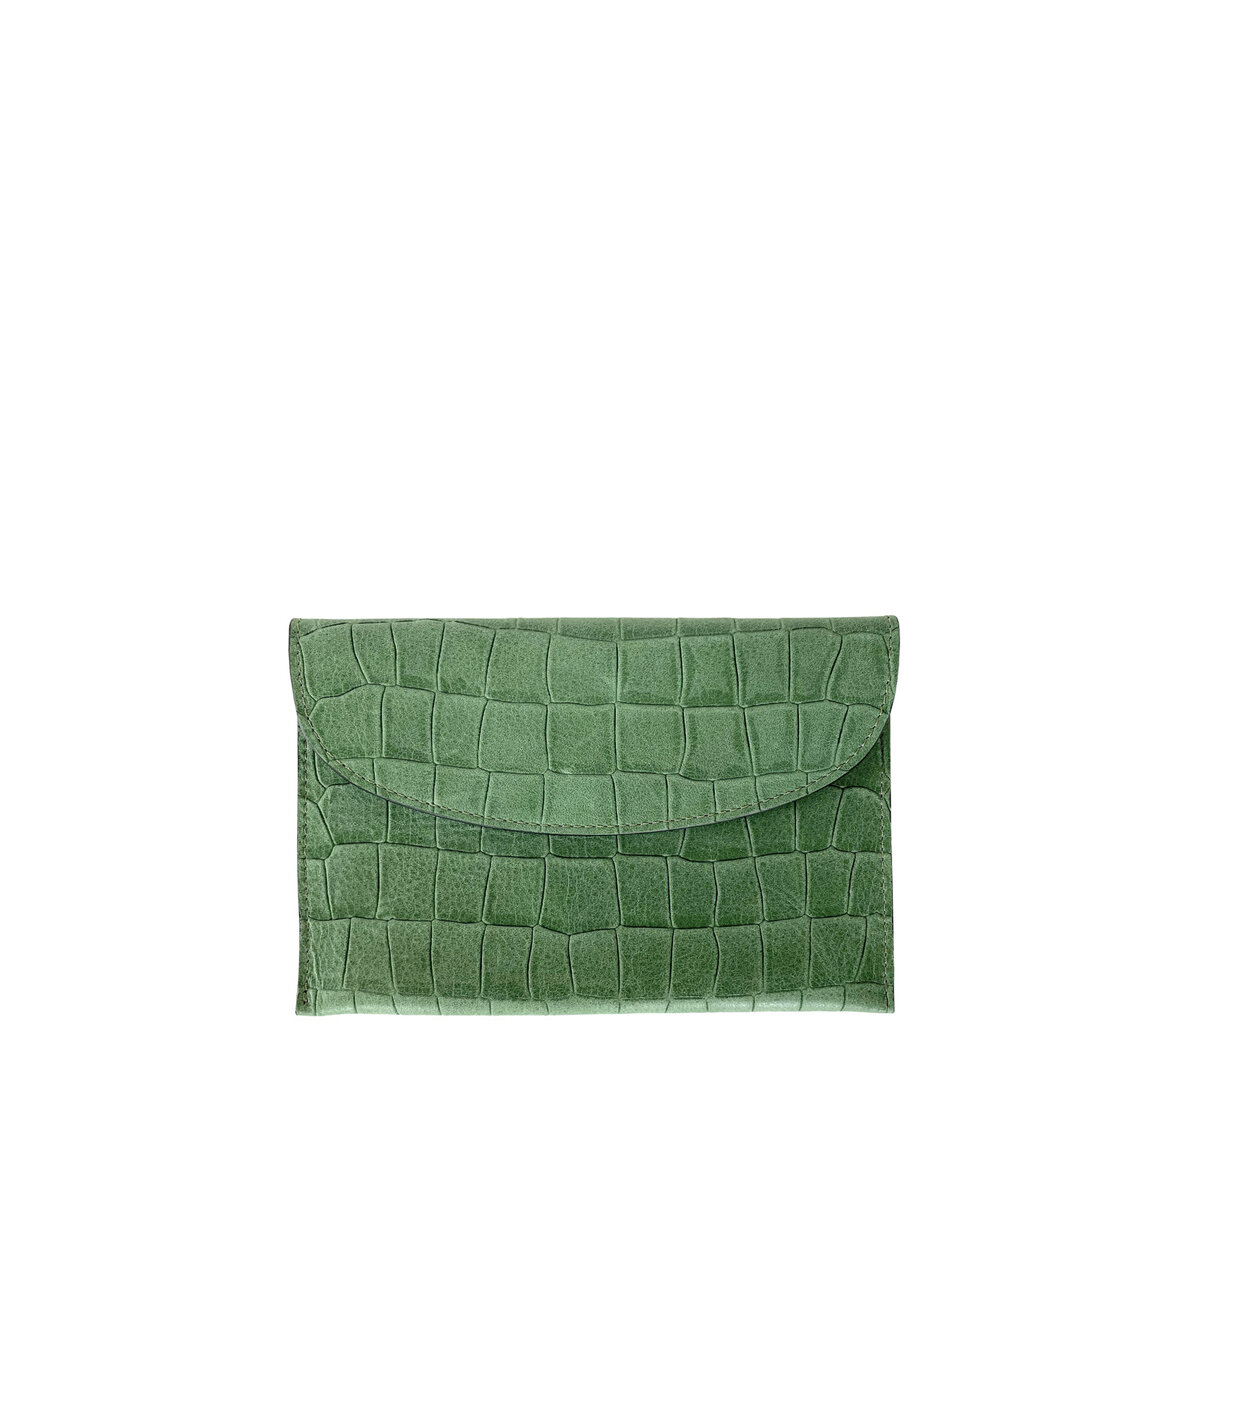 CARRÉ D'OR S - ALLIGATOR EMBOSSED - Cactus — Linde Gallery St-Barth